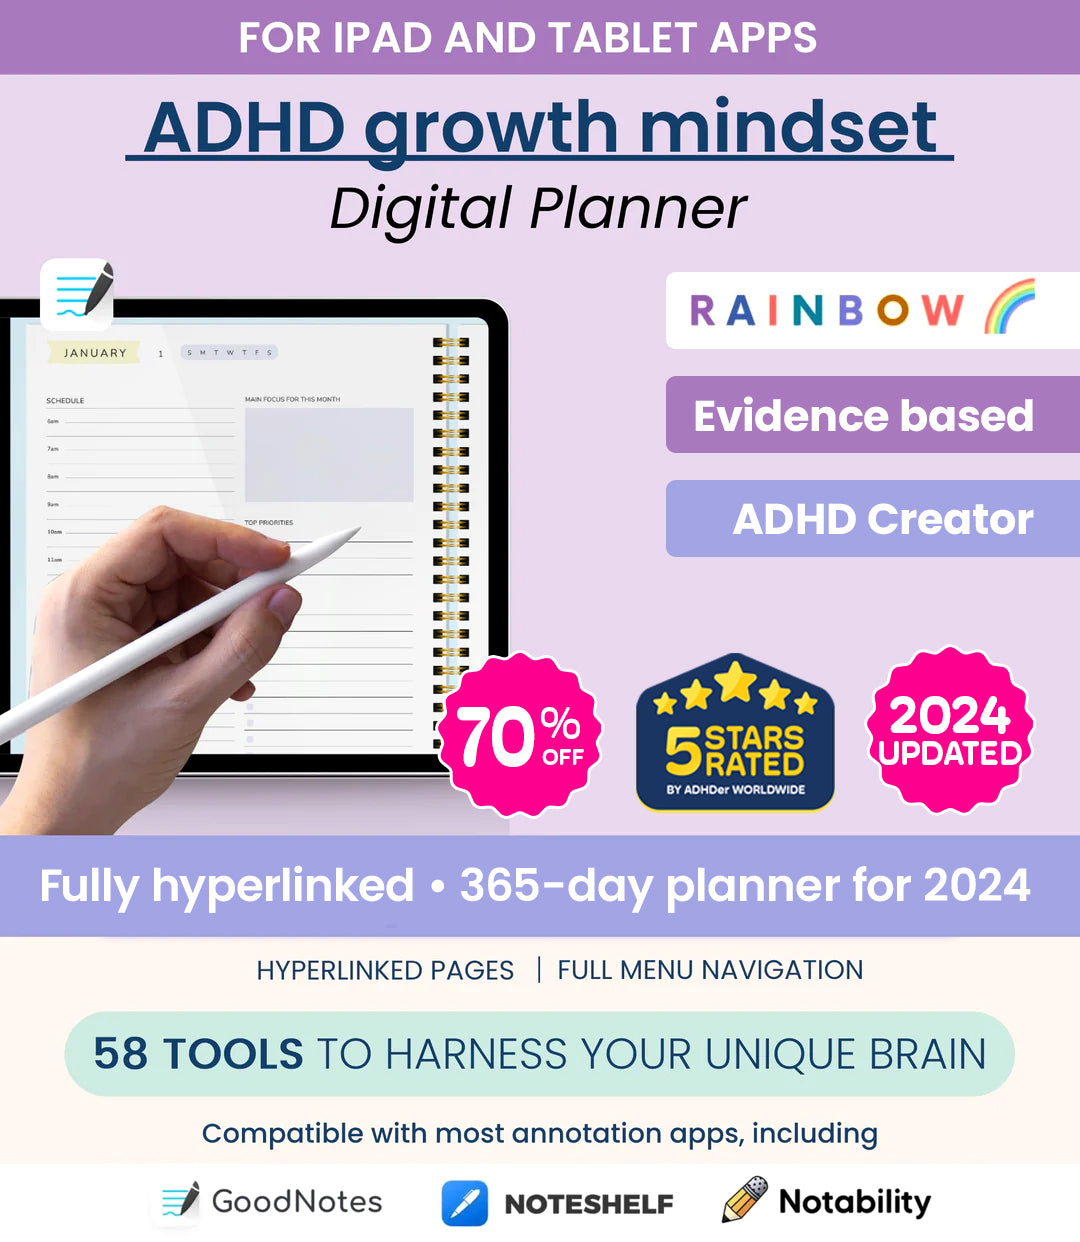 Ultimate ADHD Planner Bundle (made by an ADHDer) for iPad, Goodnotes + Android. Adult ADHD daily planner, self care & habit tracker. Science based